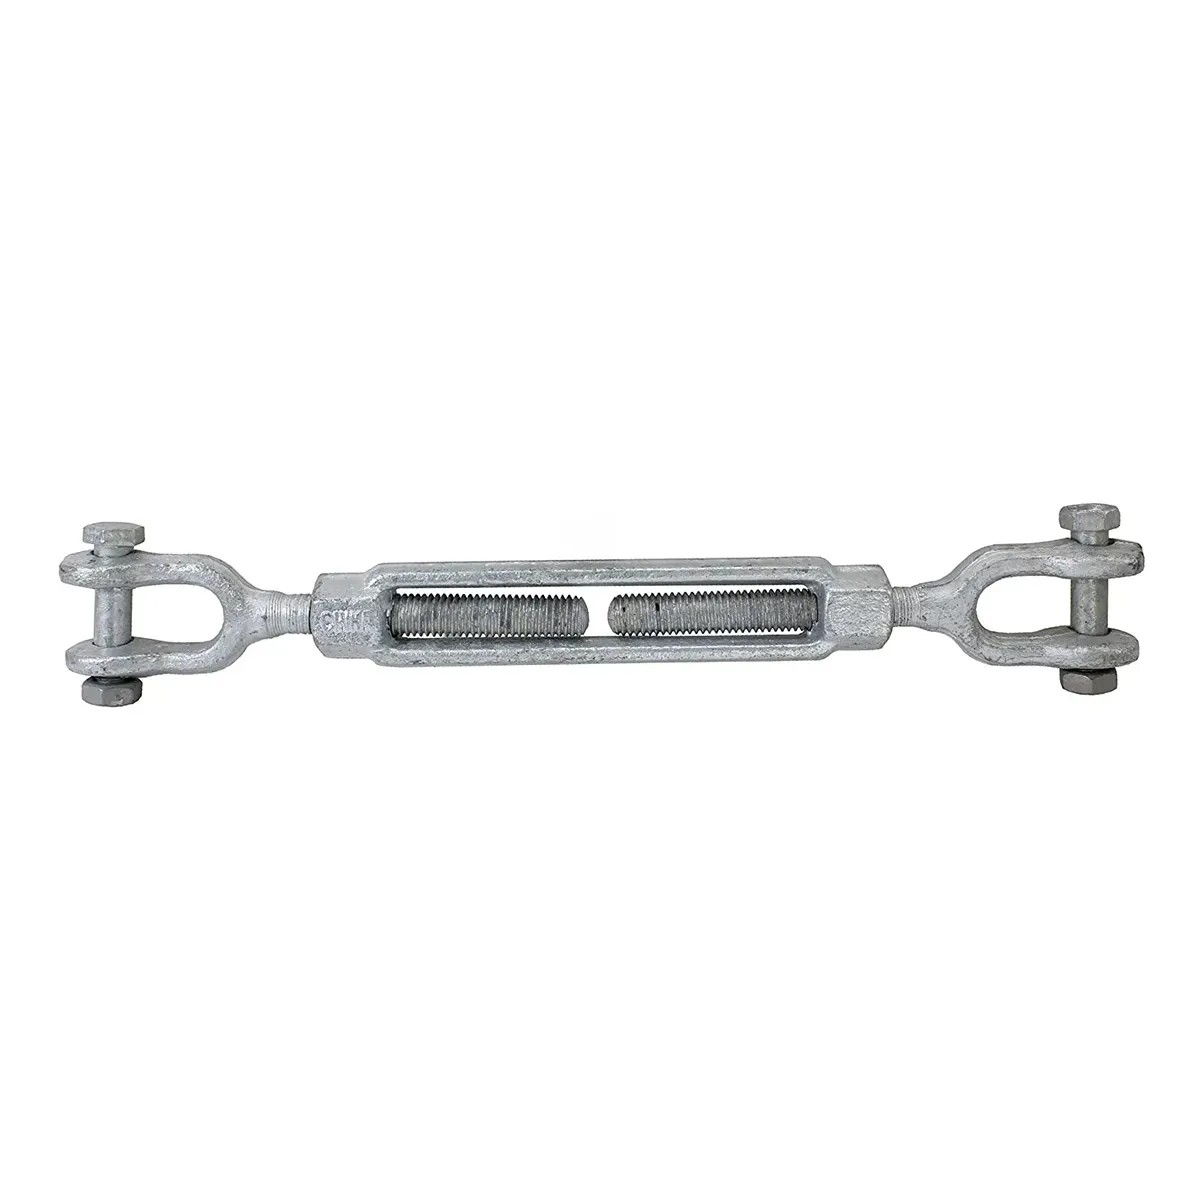 16MM European Stainless Steel Type 16mm Jaw Jaw Open Body Galvanise Dorp Forged Din1480 Turnbuckle U.s. Type